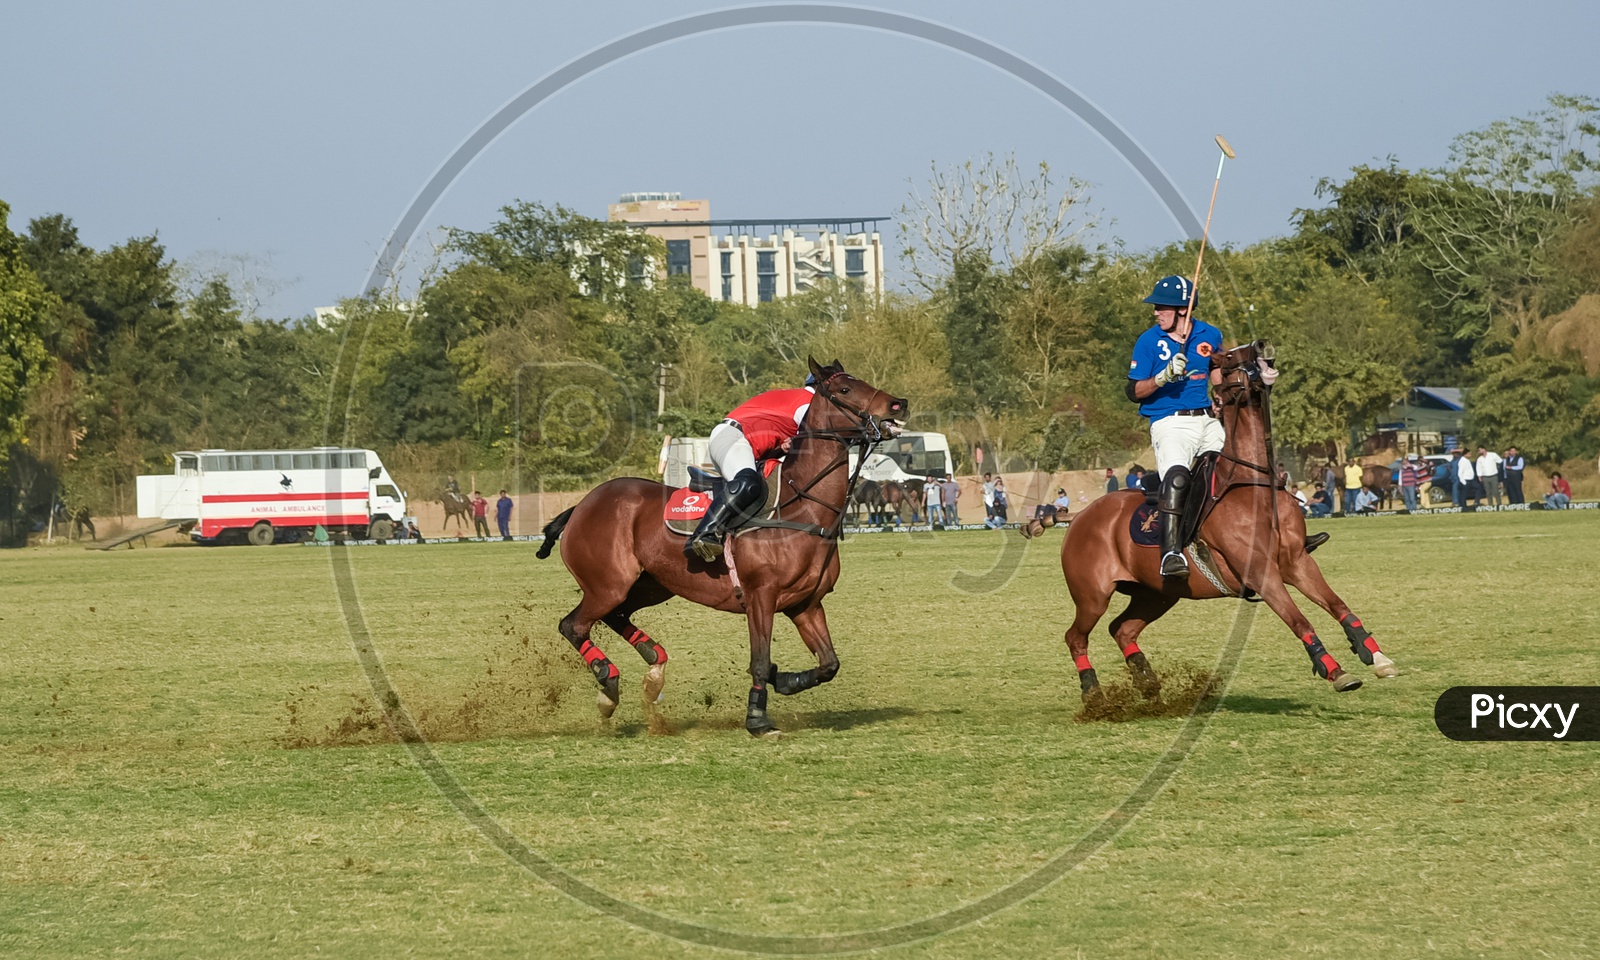 Horses in action at Polo Match